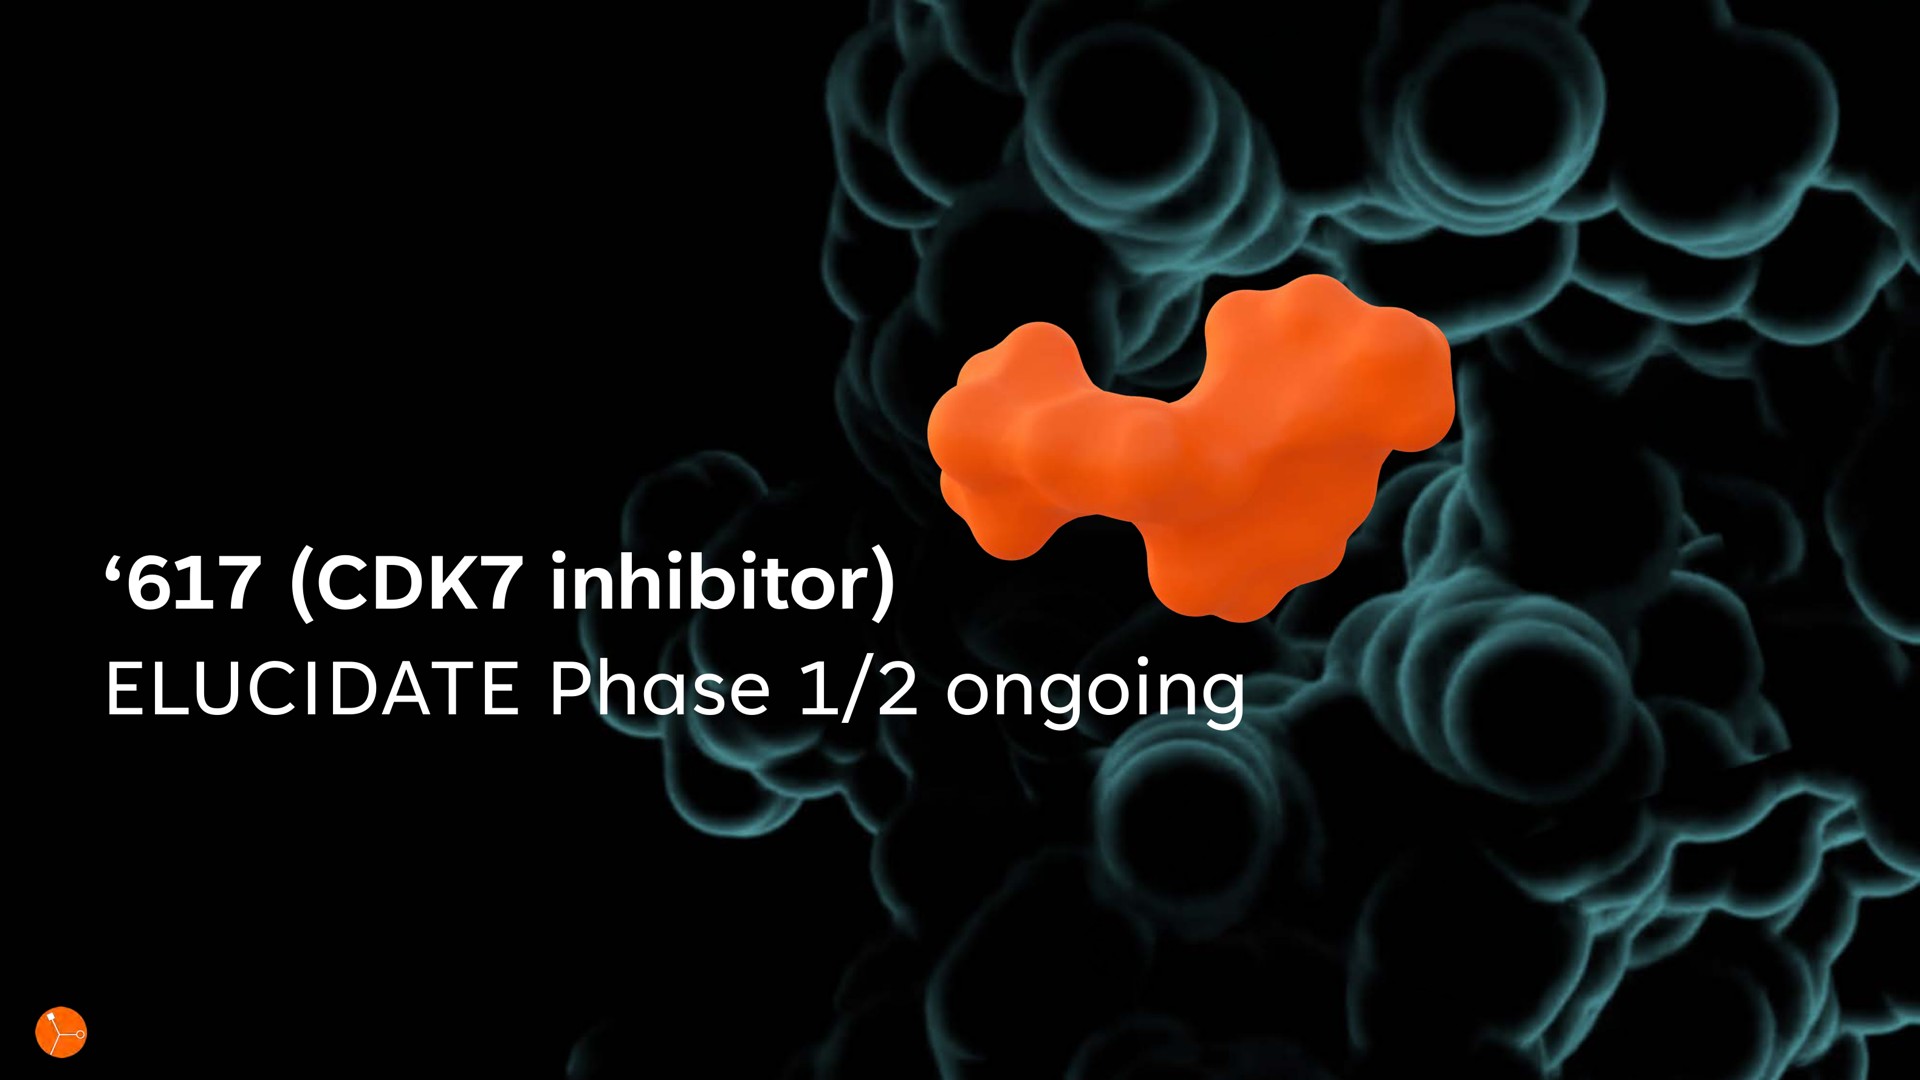 inhibitor elucidate phase ongoing a | Exscientia